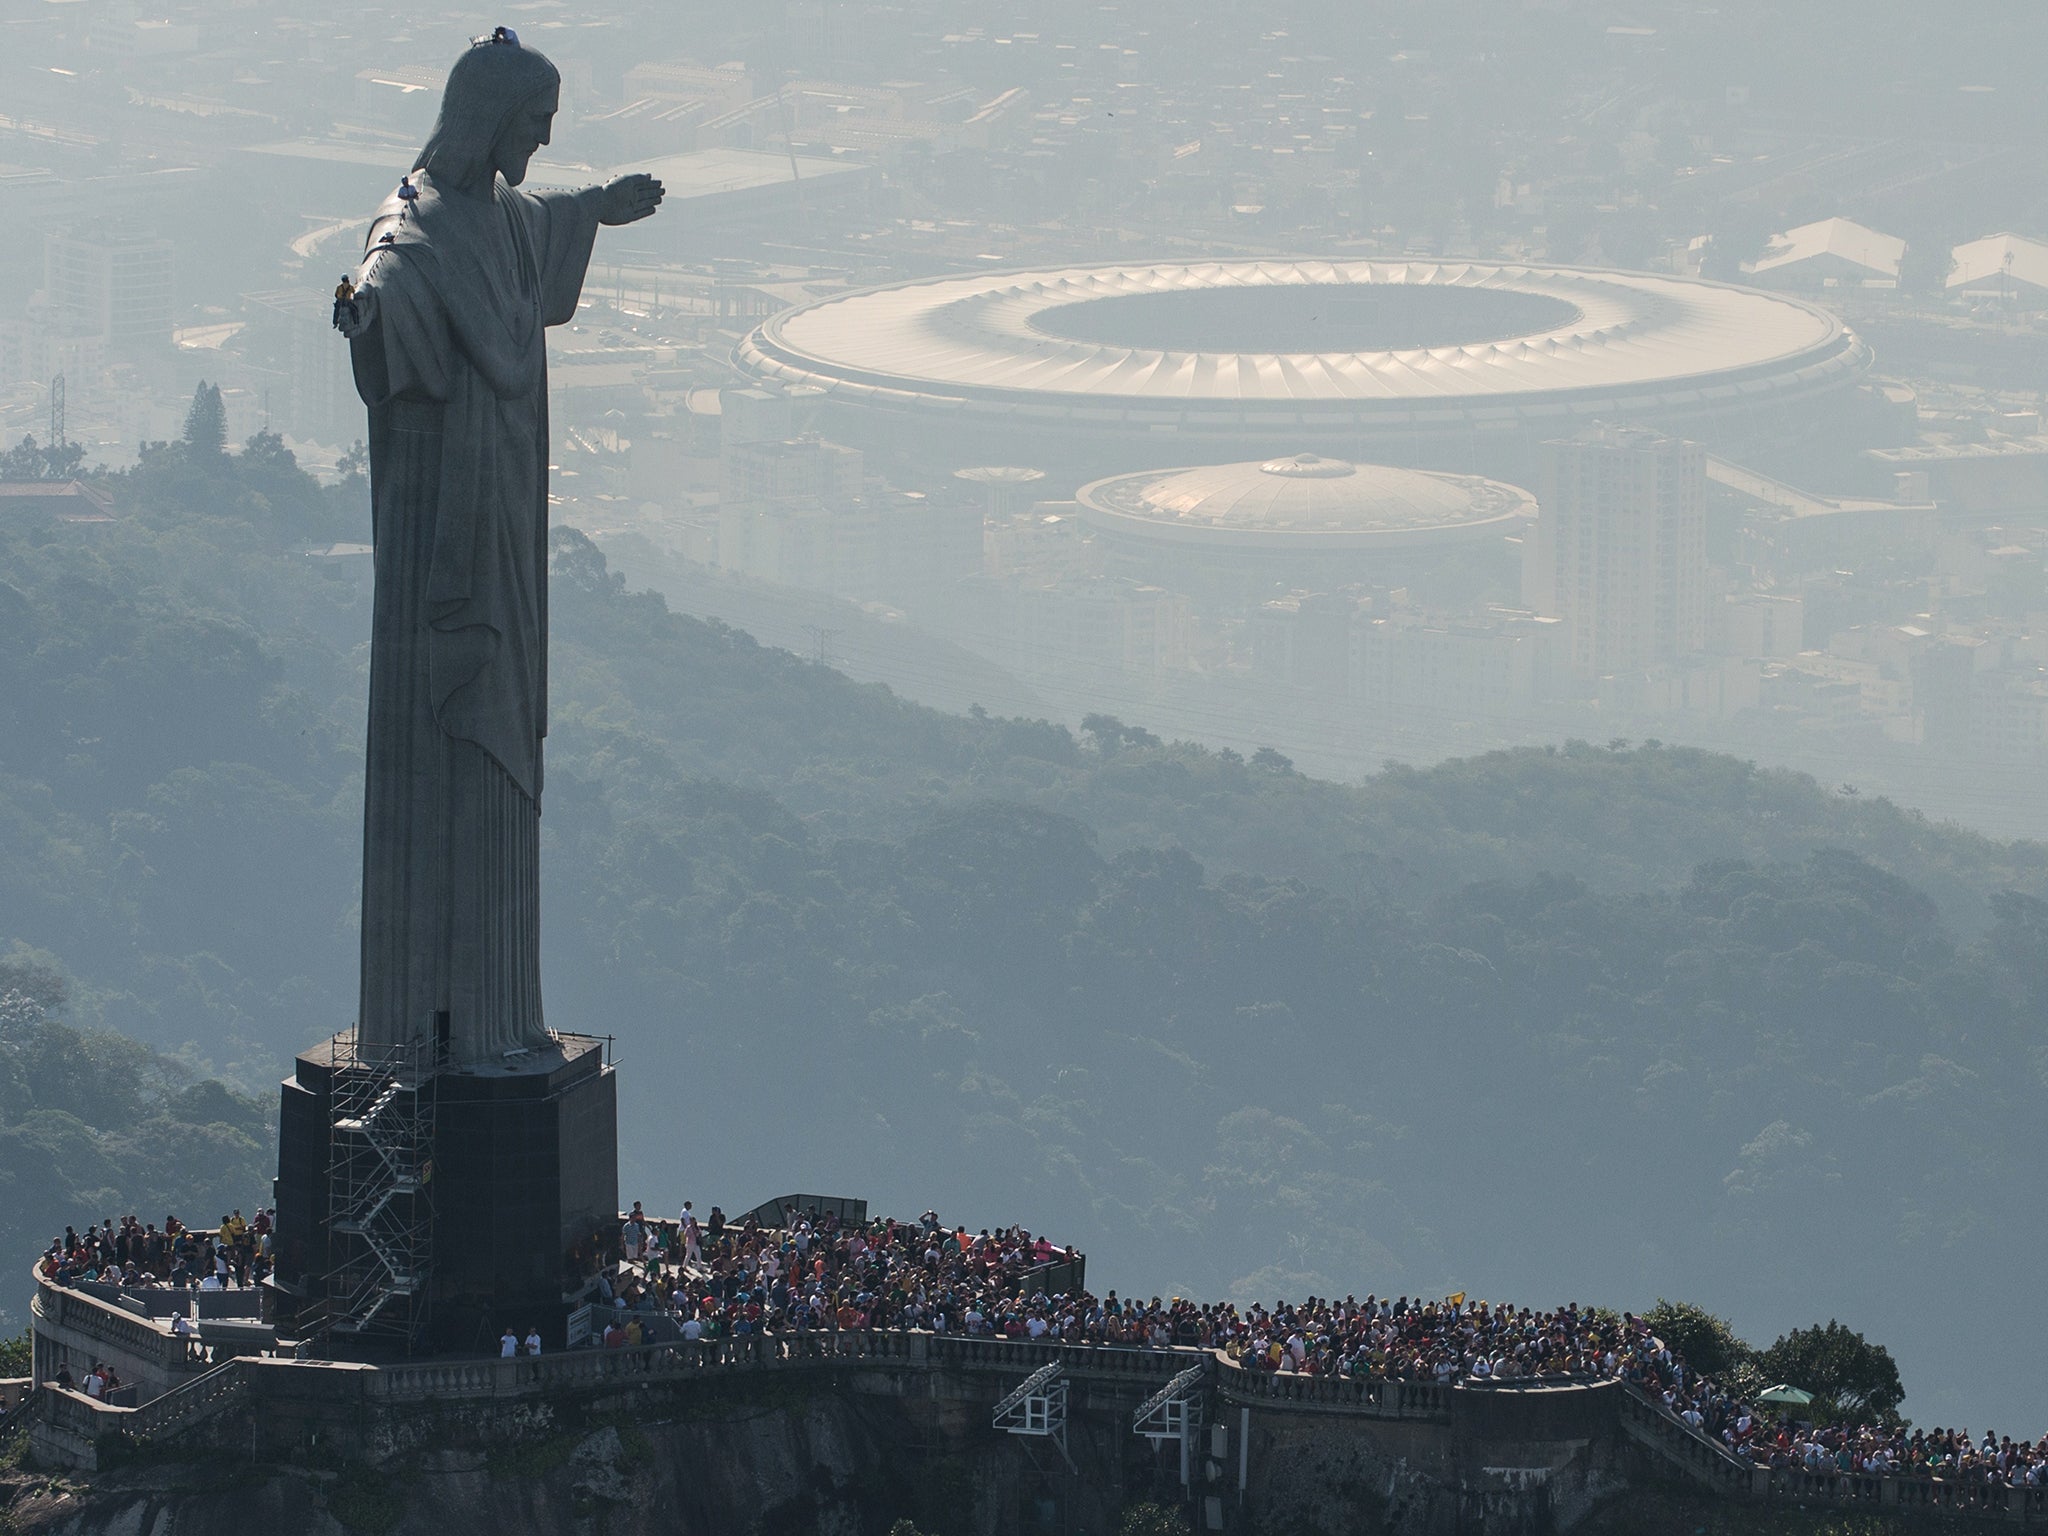 The Maracana can be seen behind the iconic Christ the Redeemer statue that overlooks Rio de Janeiro